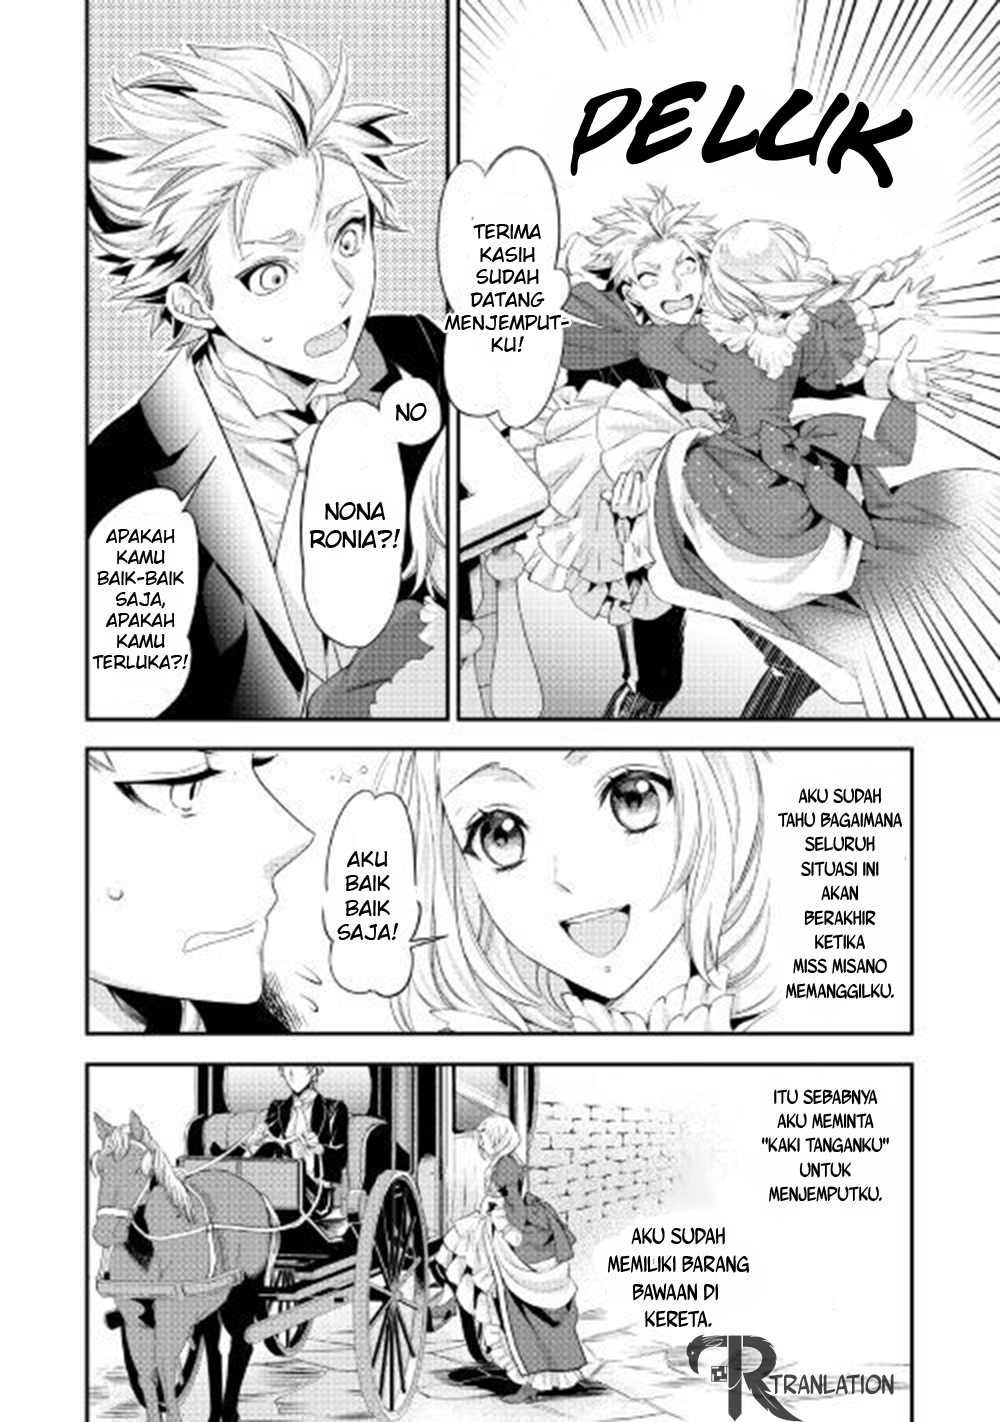 Milady Just Wants to Relax Chapter 01 20